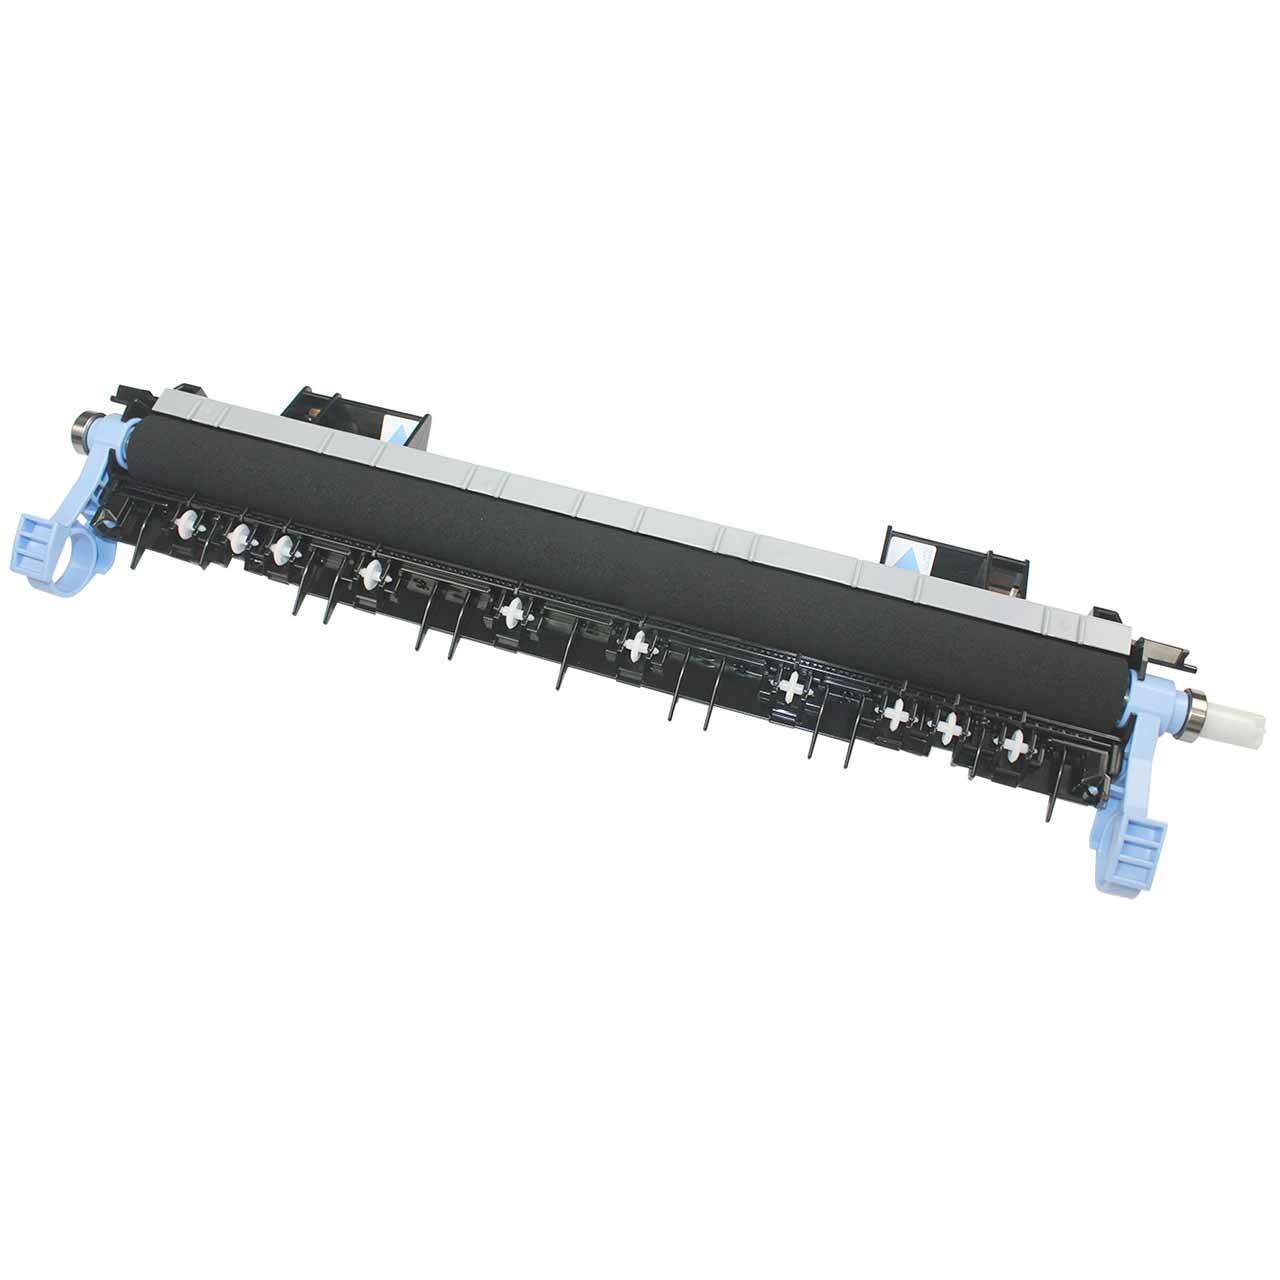 HP OEM D7H14-67902 Secondary (2nd) Transfer Roller Assembly